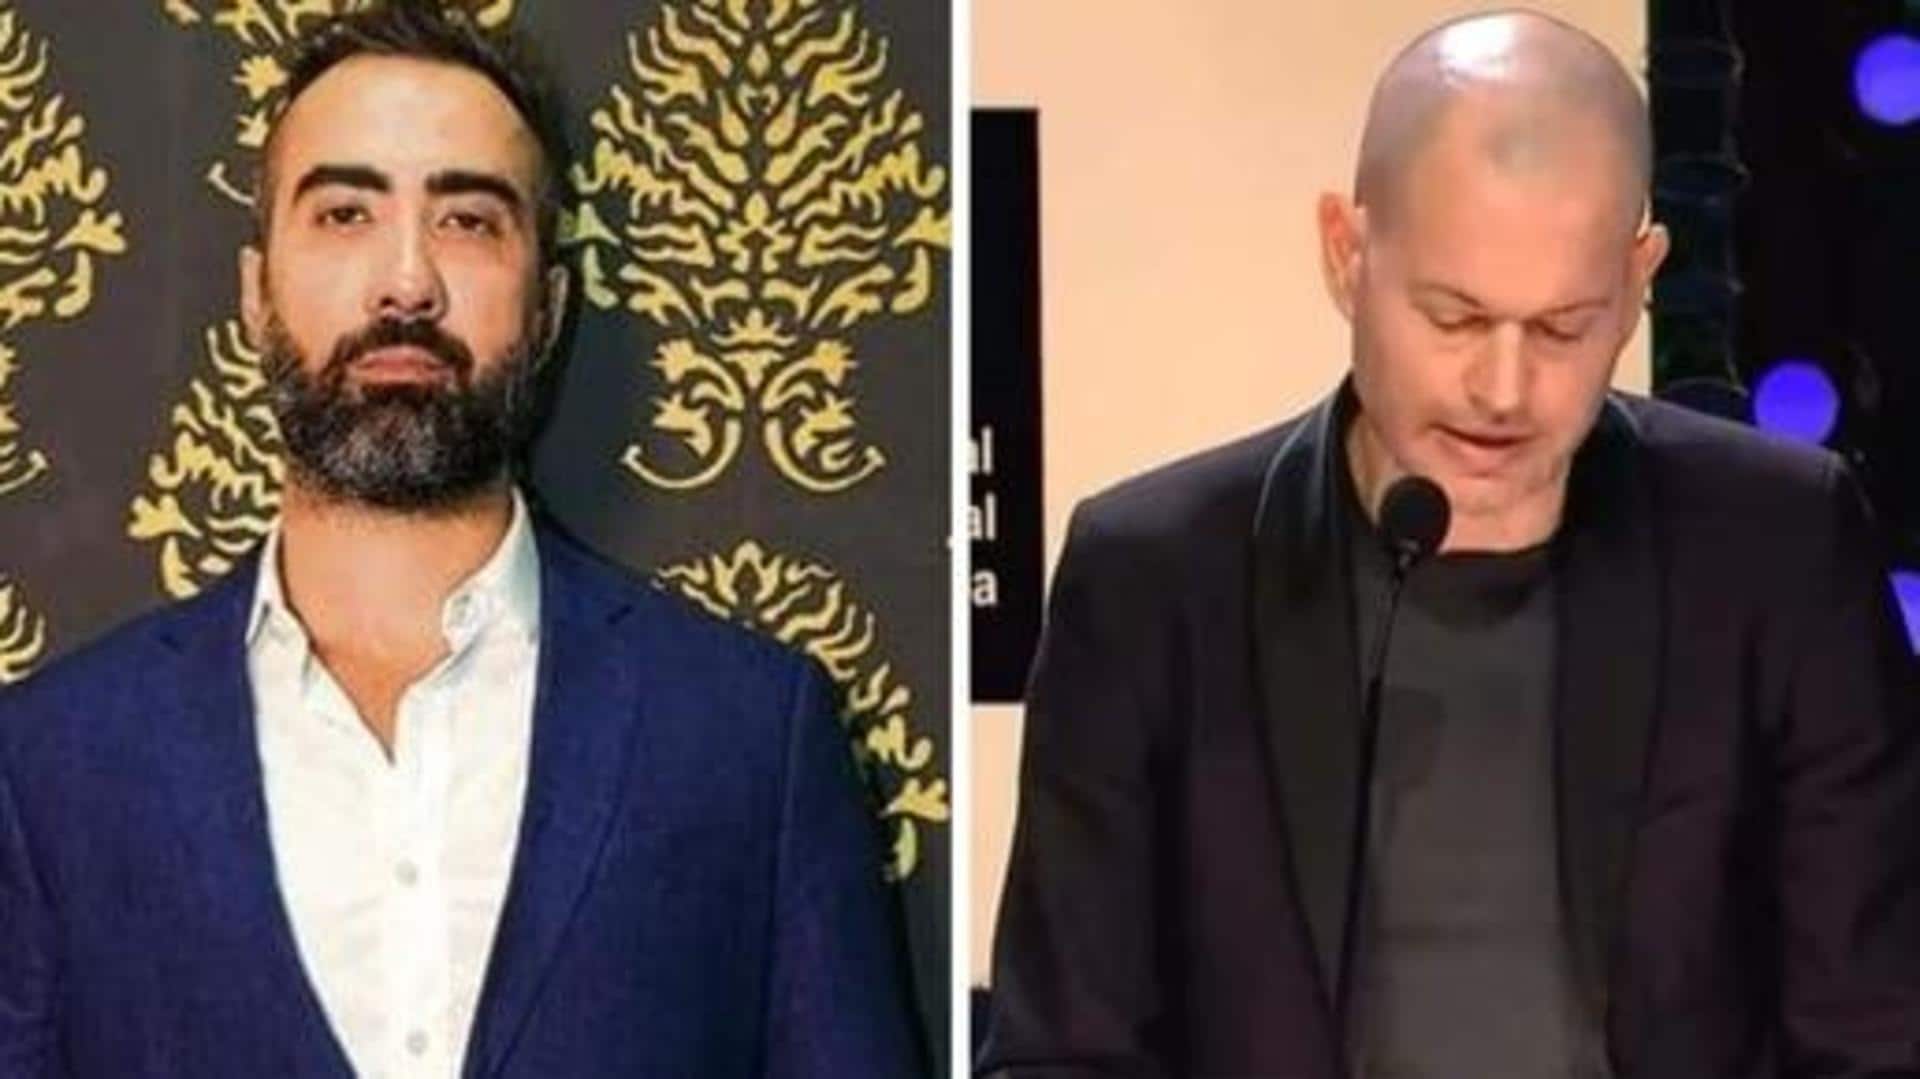 Indian celebrities take sides on Lapid's 'The Kashmir Files' comments